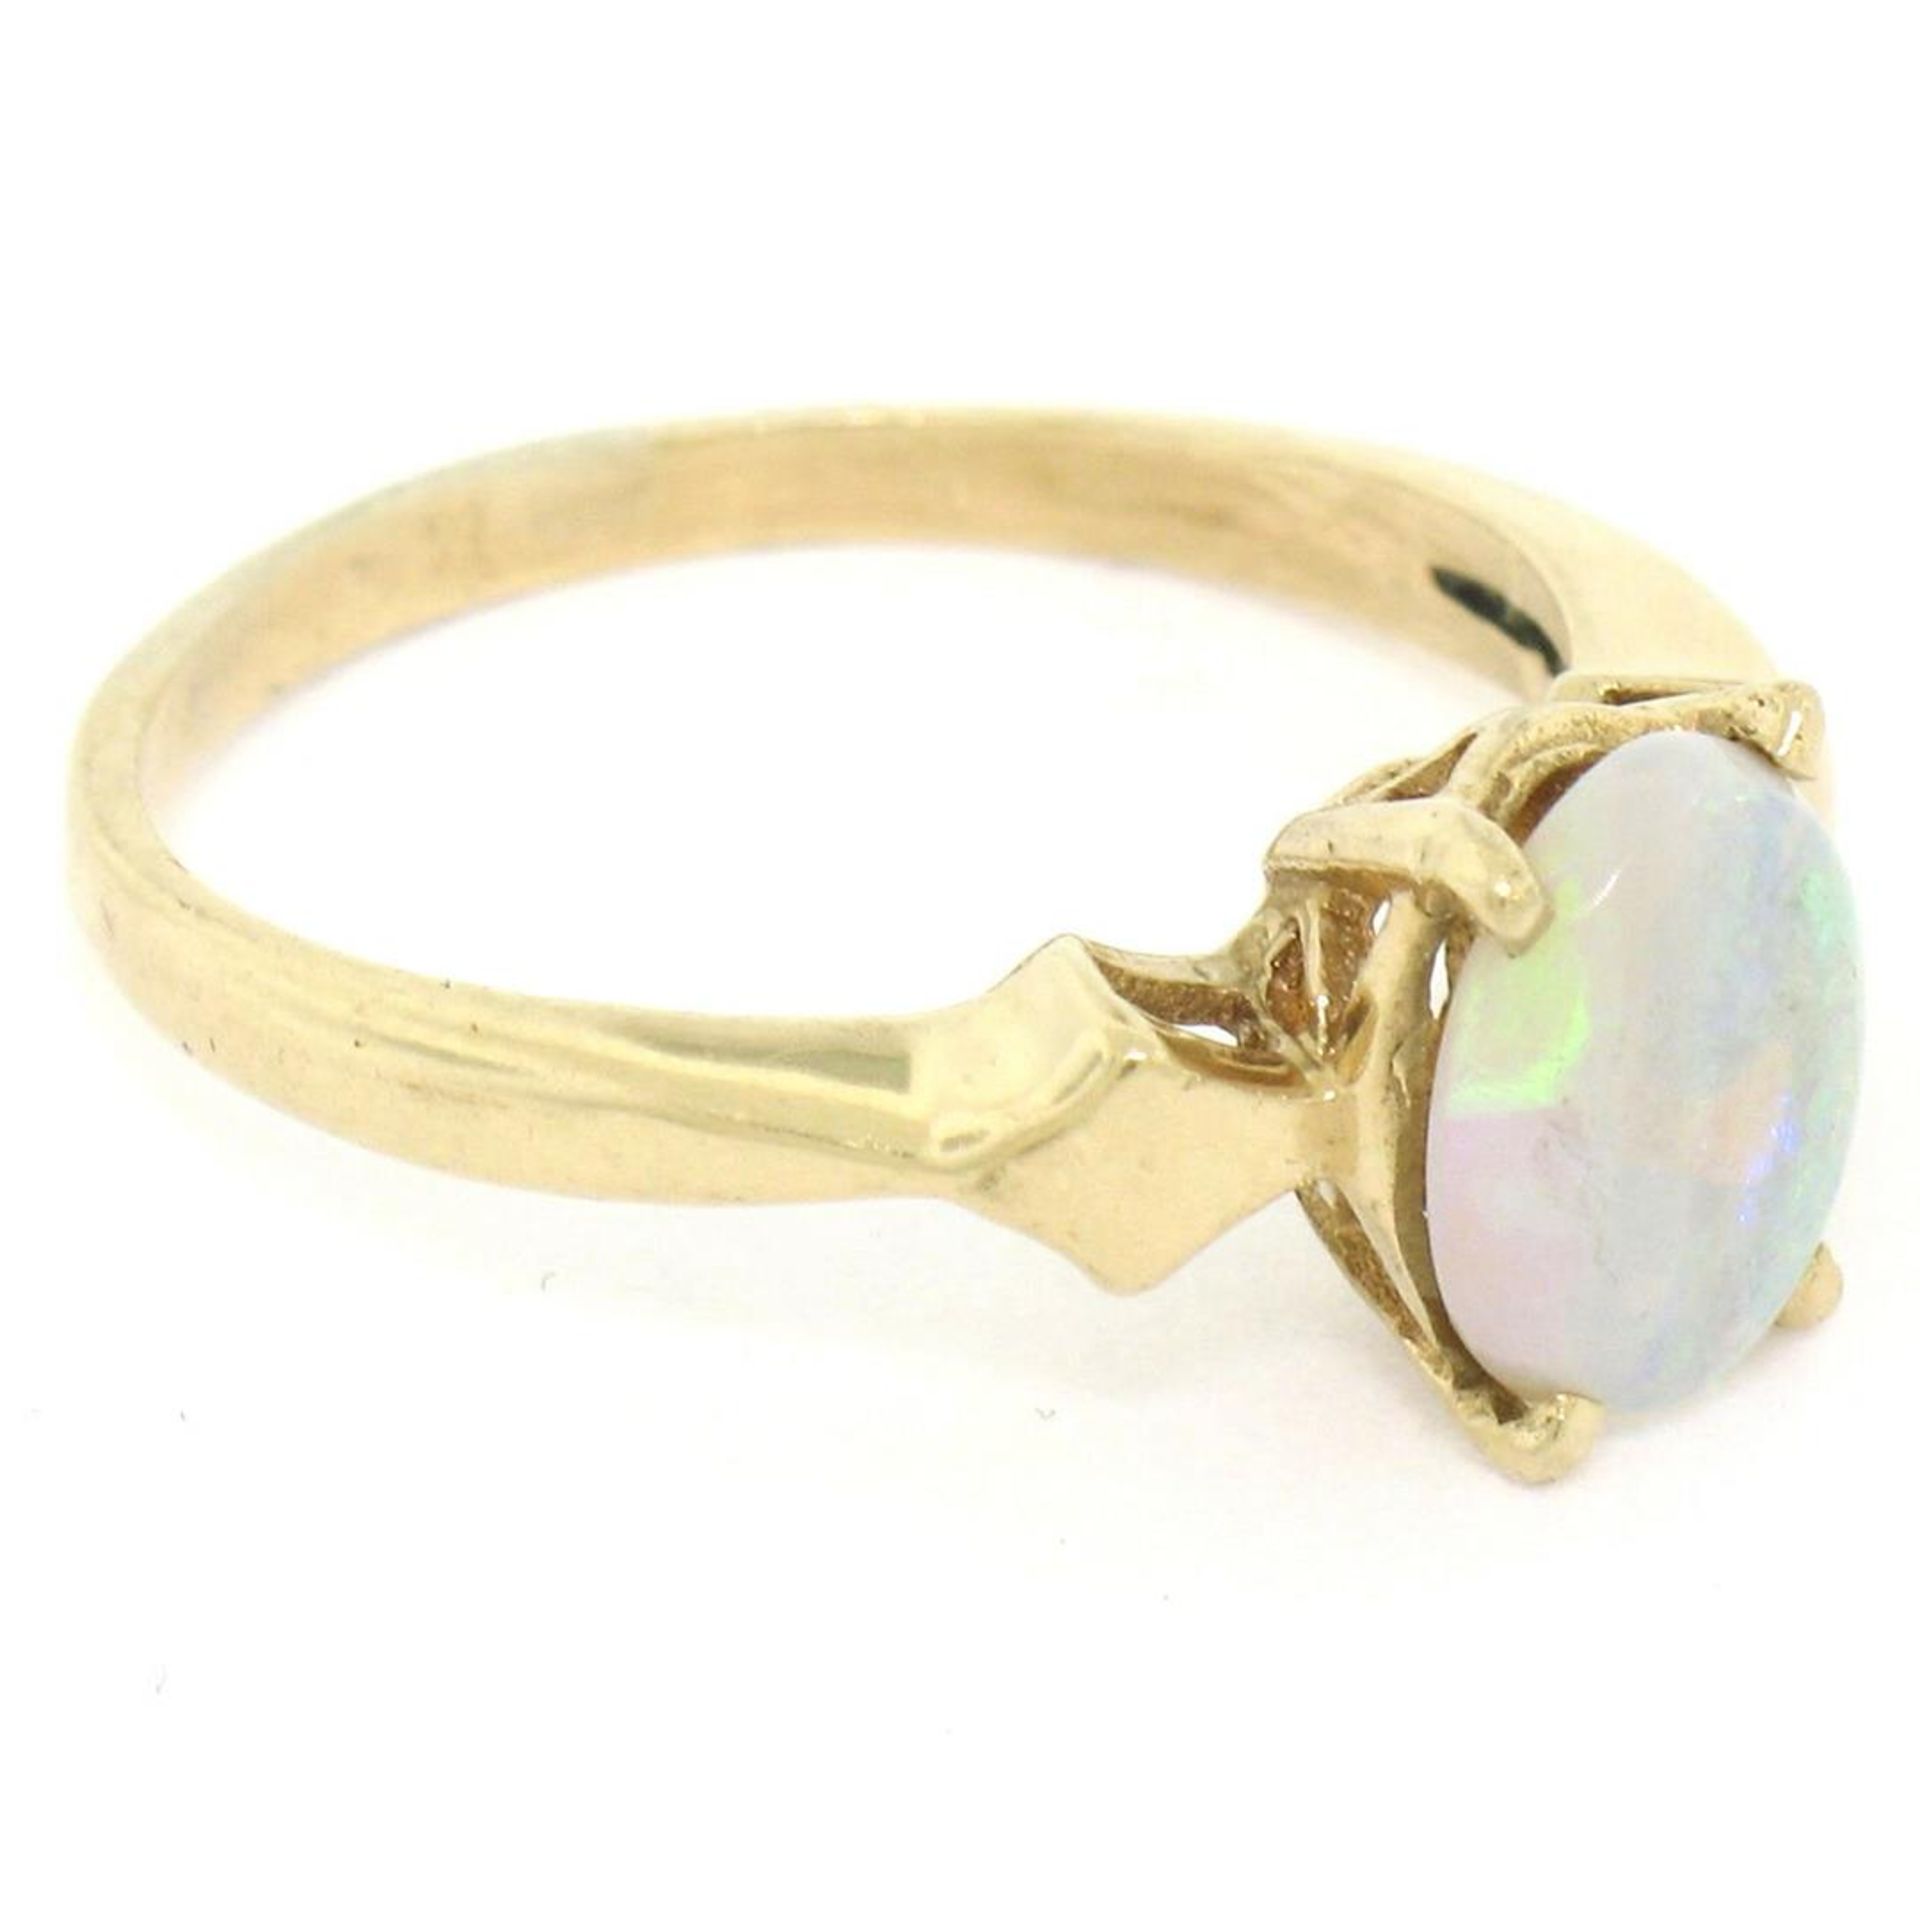 Vintage 14K Yellow Gold 0.65ct Petite Oval Cabochon Opal Solitaire Ring Size 6 - Image 4 of 9